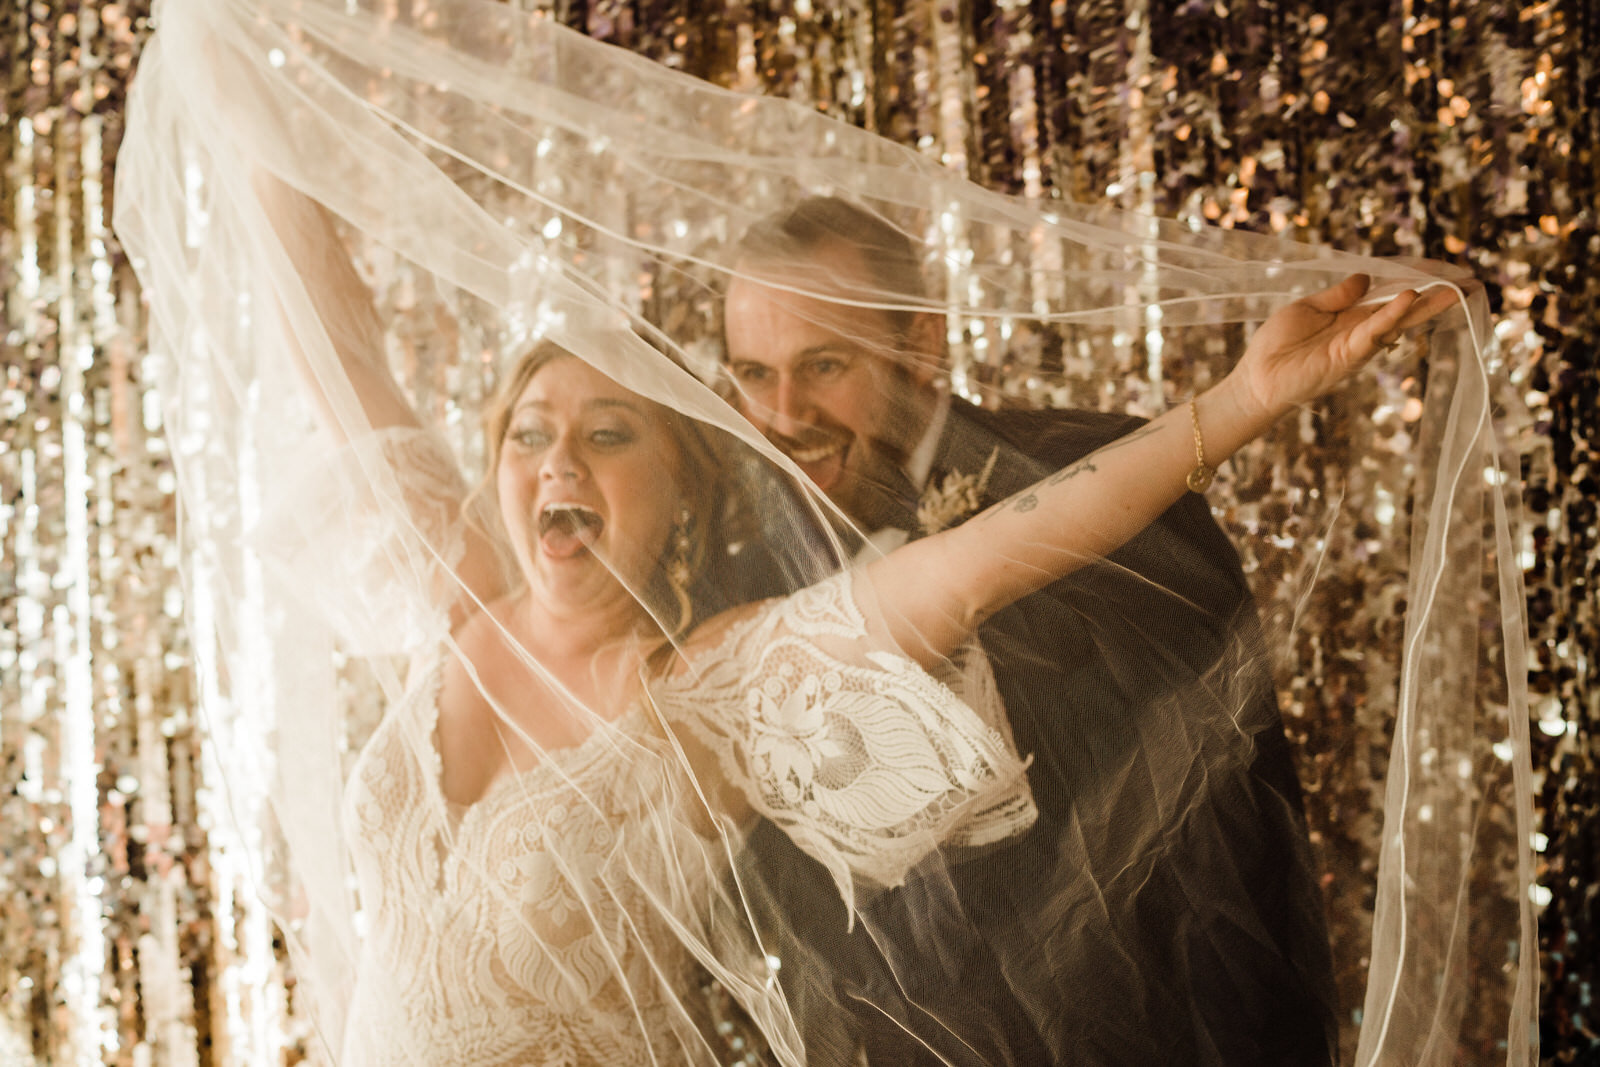 Goofy photo of Bride and Groom with Veil at Las Vegas Margaritaville wedding reception